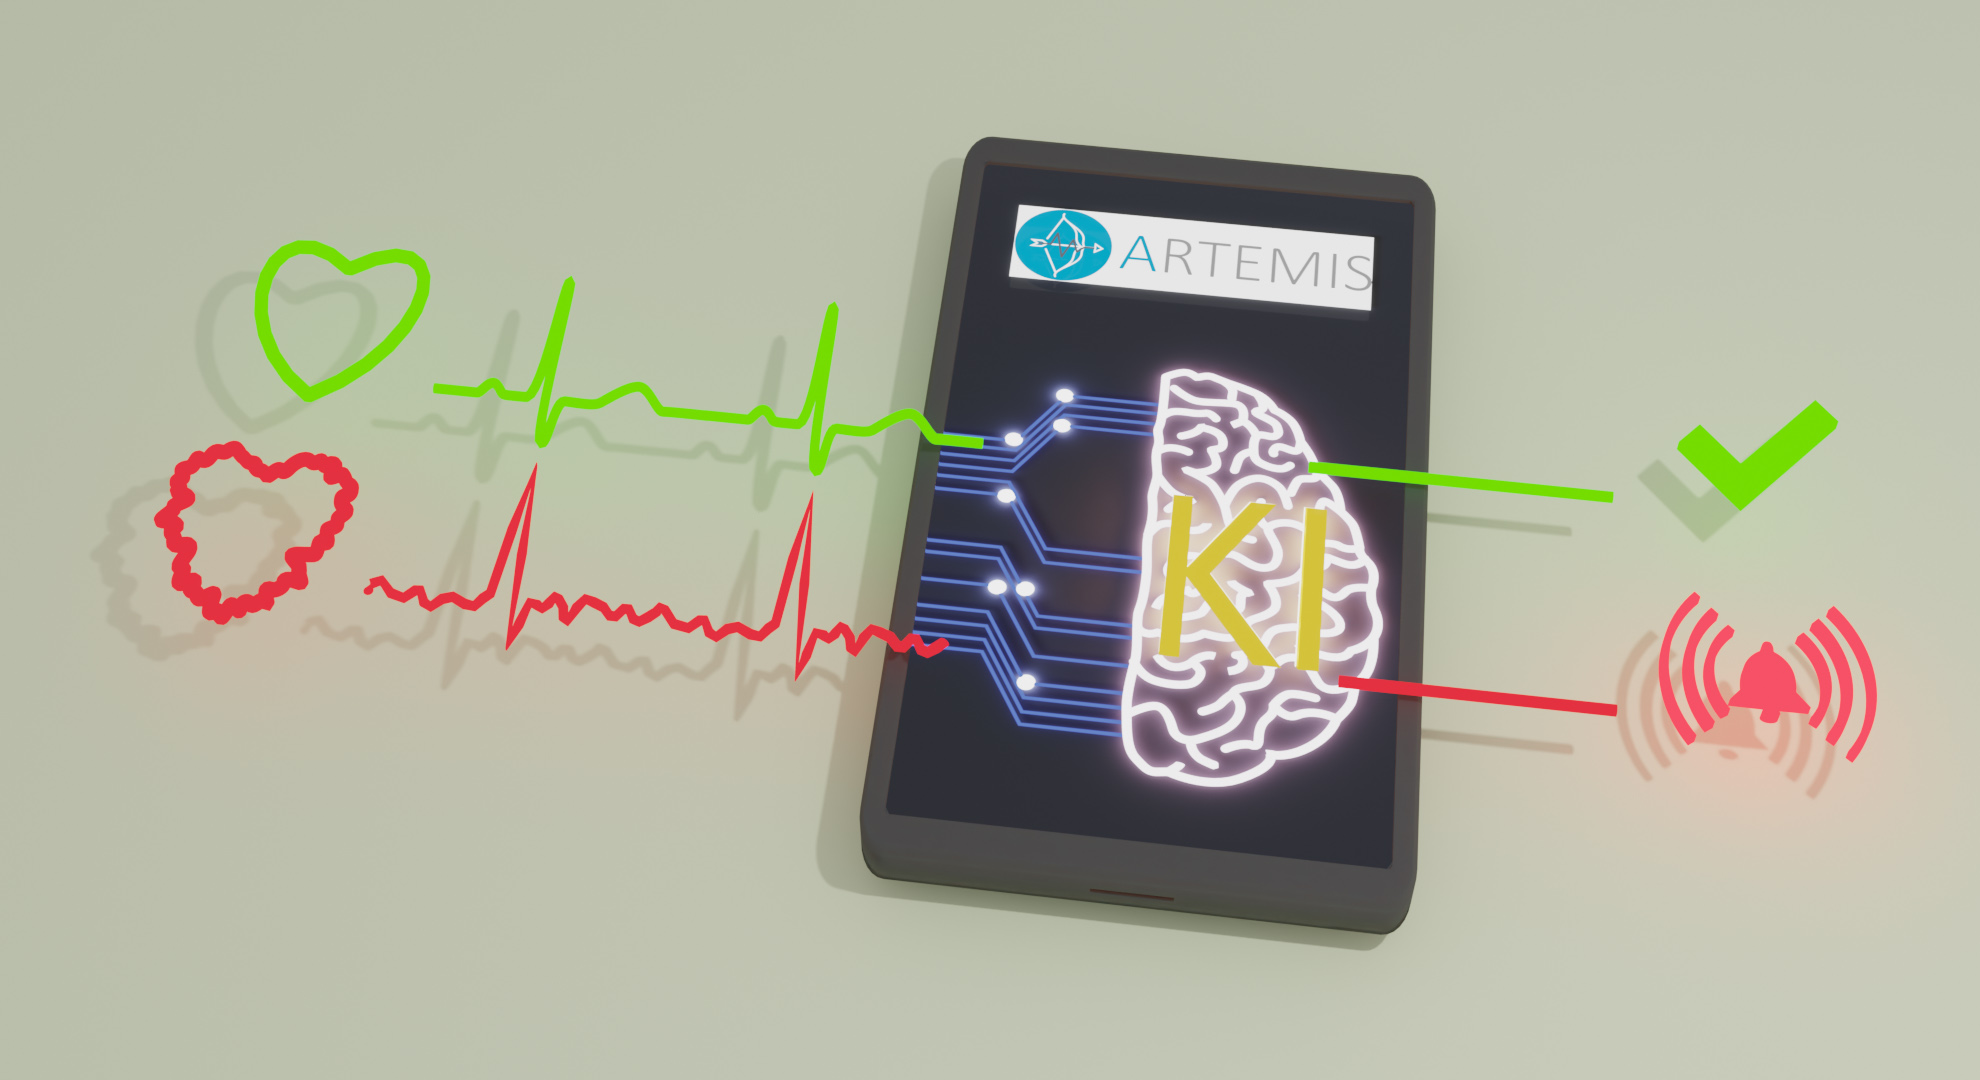 Non-invasive Healthcare with Embedded AI for local, energy-saving and self-learning analysis of e.g., ECG data